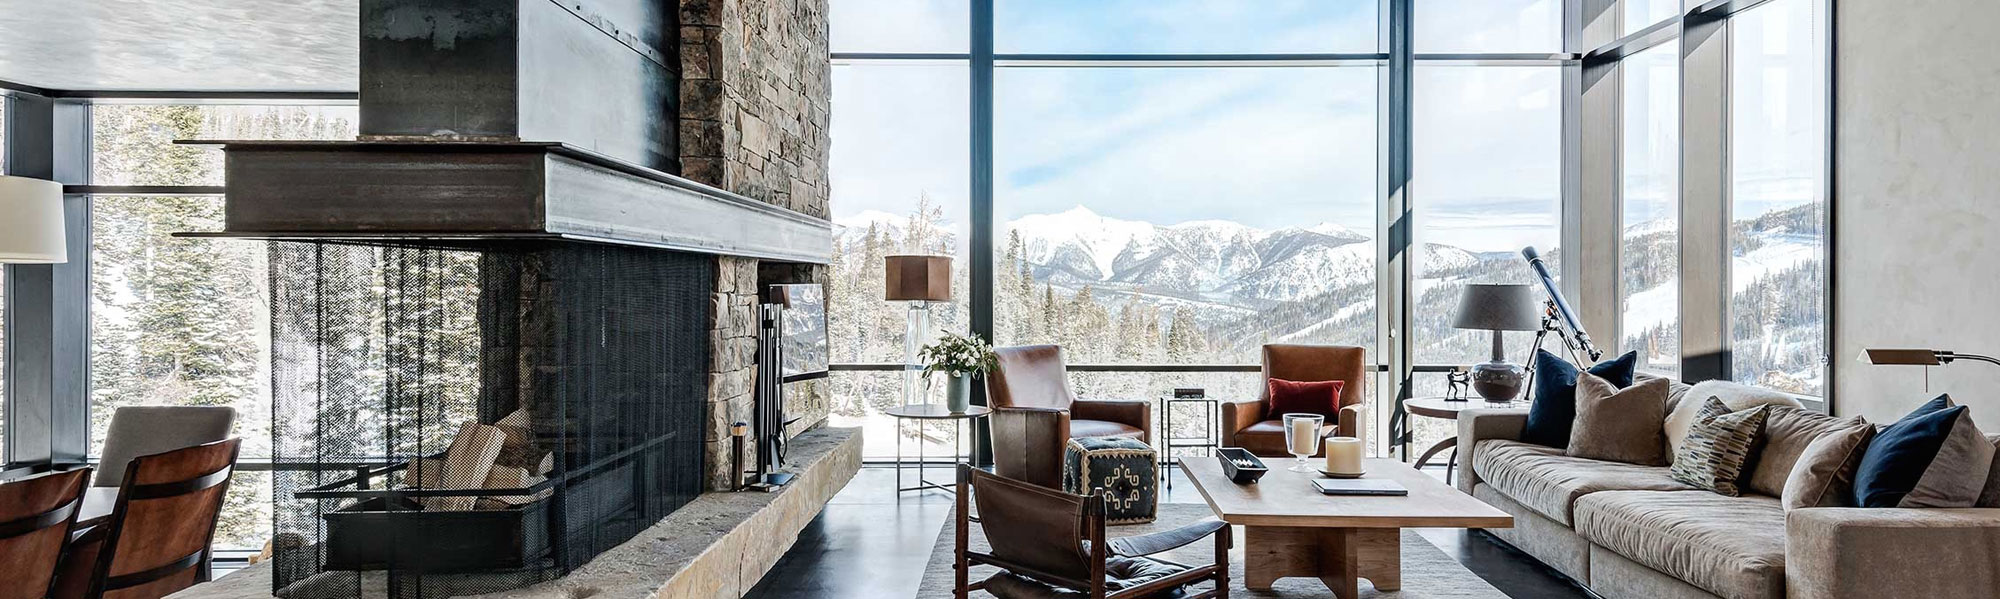 Living Room with a view of the Rockies